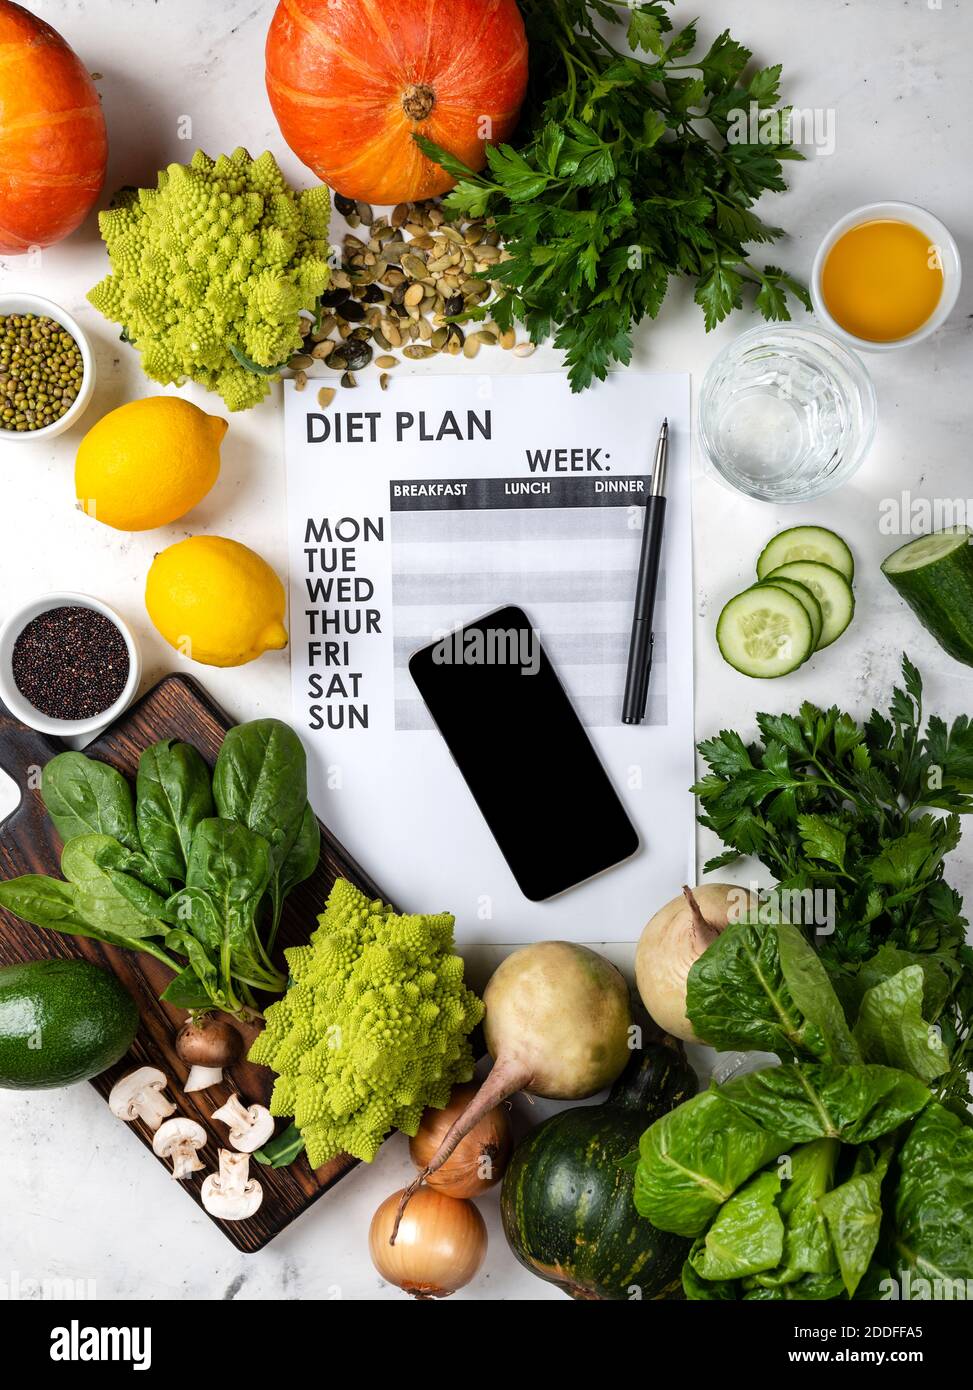 Smartphone and Diet plan on the sheet Set of healthy food on the table. Top view Stock Photo